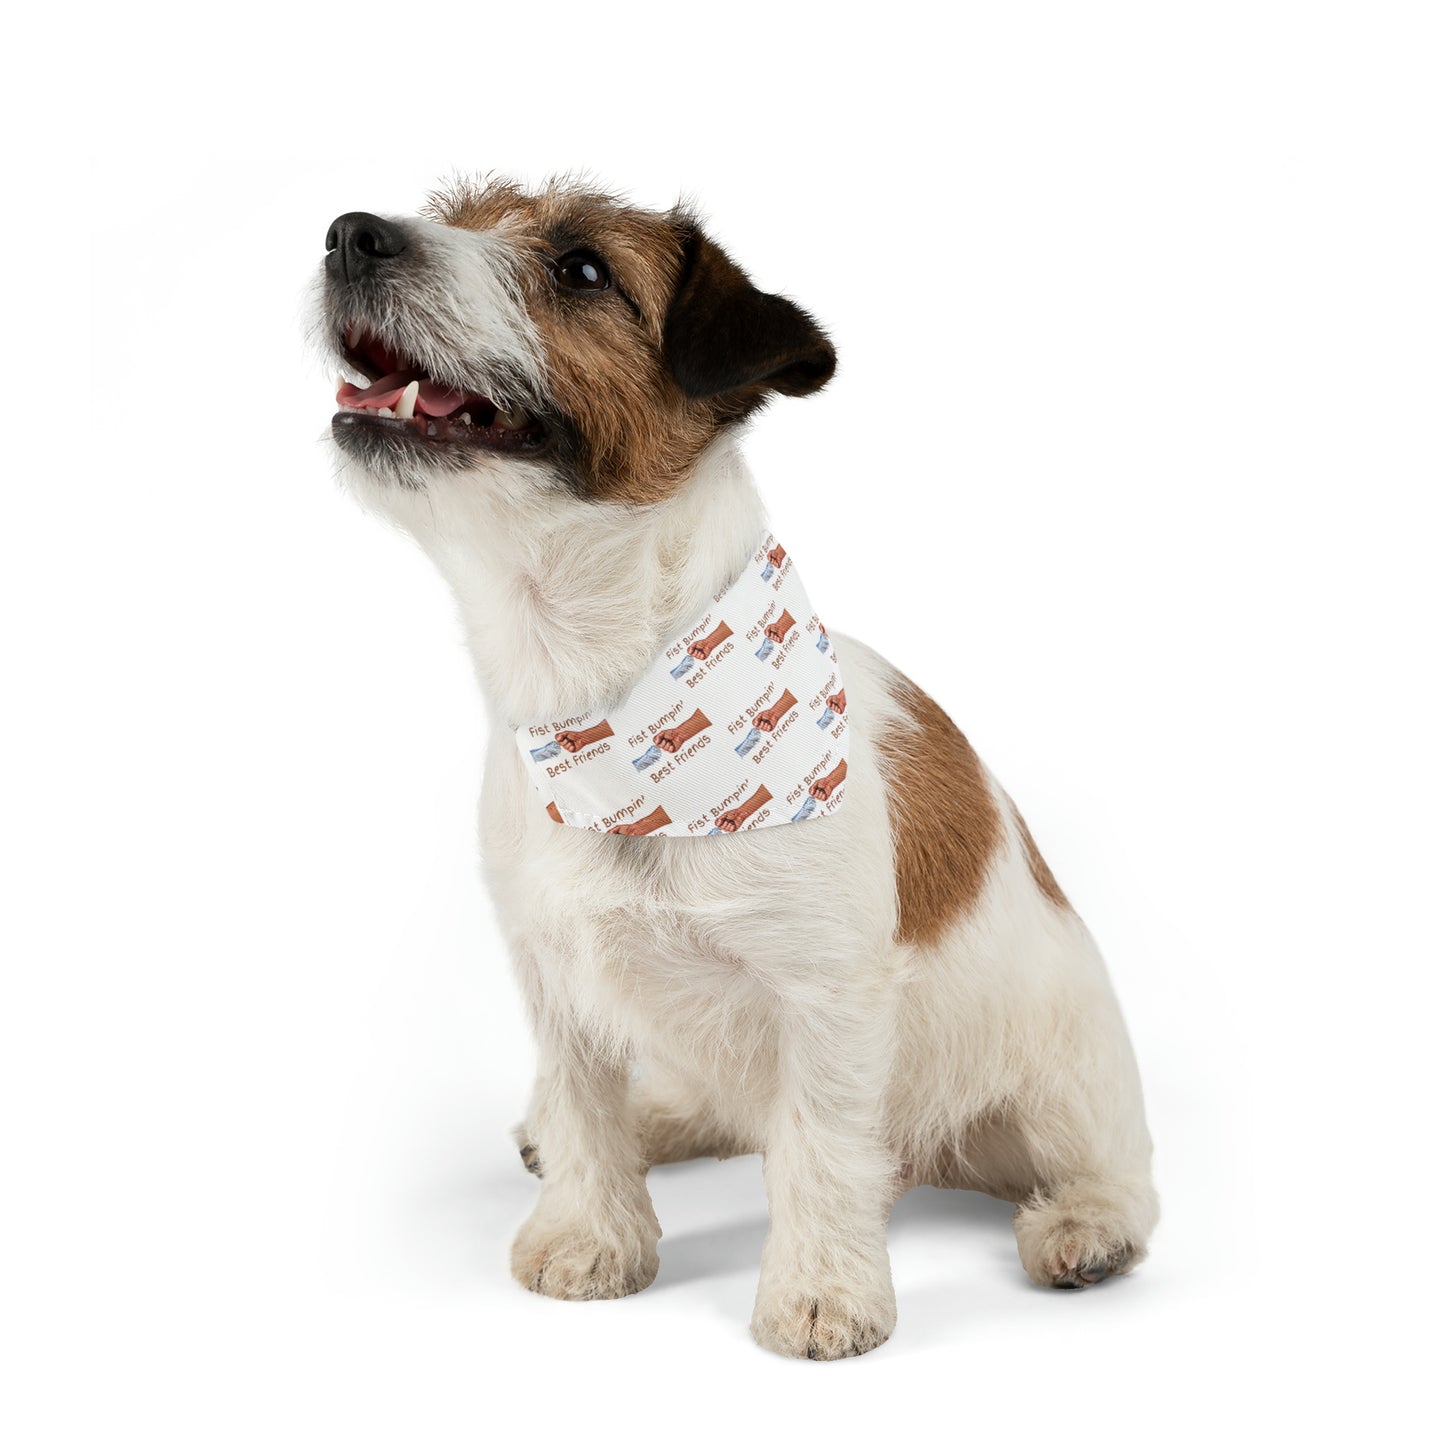 Fist Bumpin’ Best Friends Opie’s Cavalier King Charles Spaniel Paw Pet Bandana Collar White with Brown lettering.